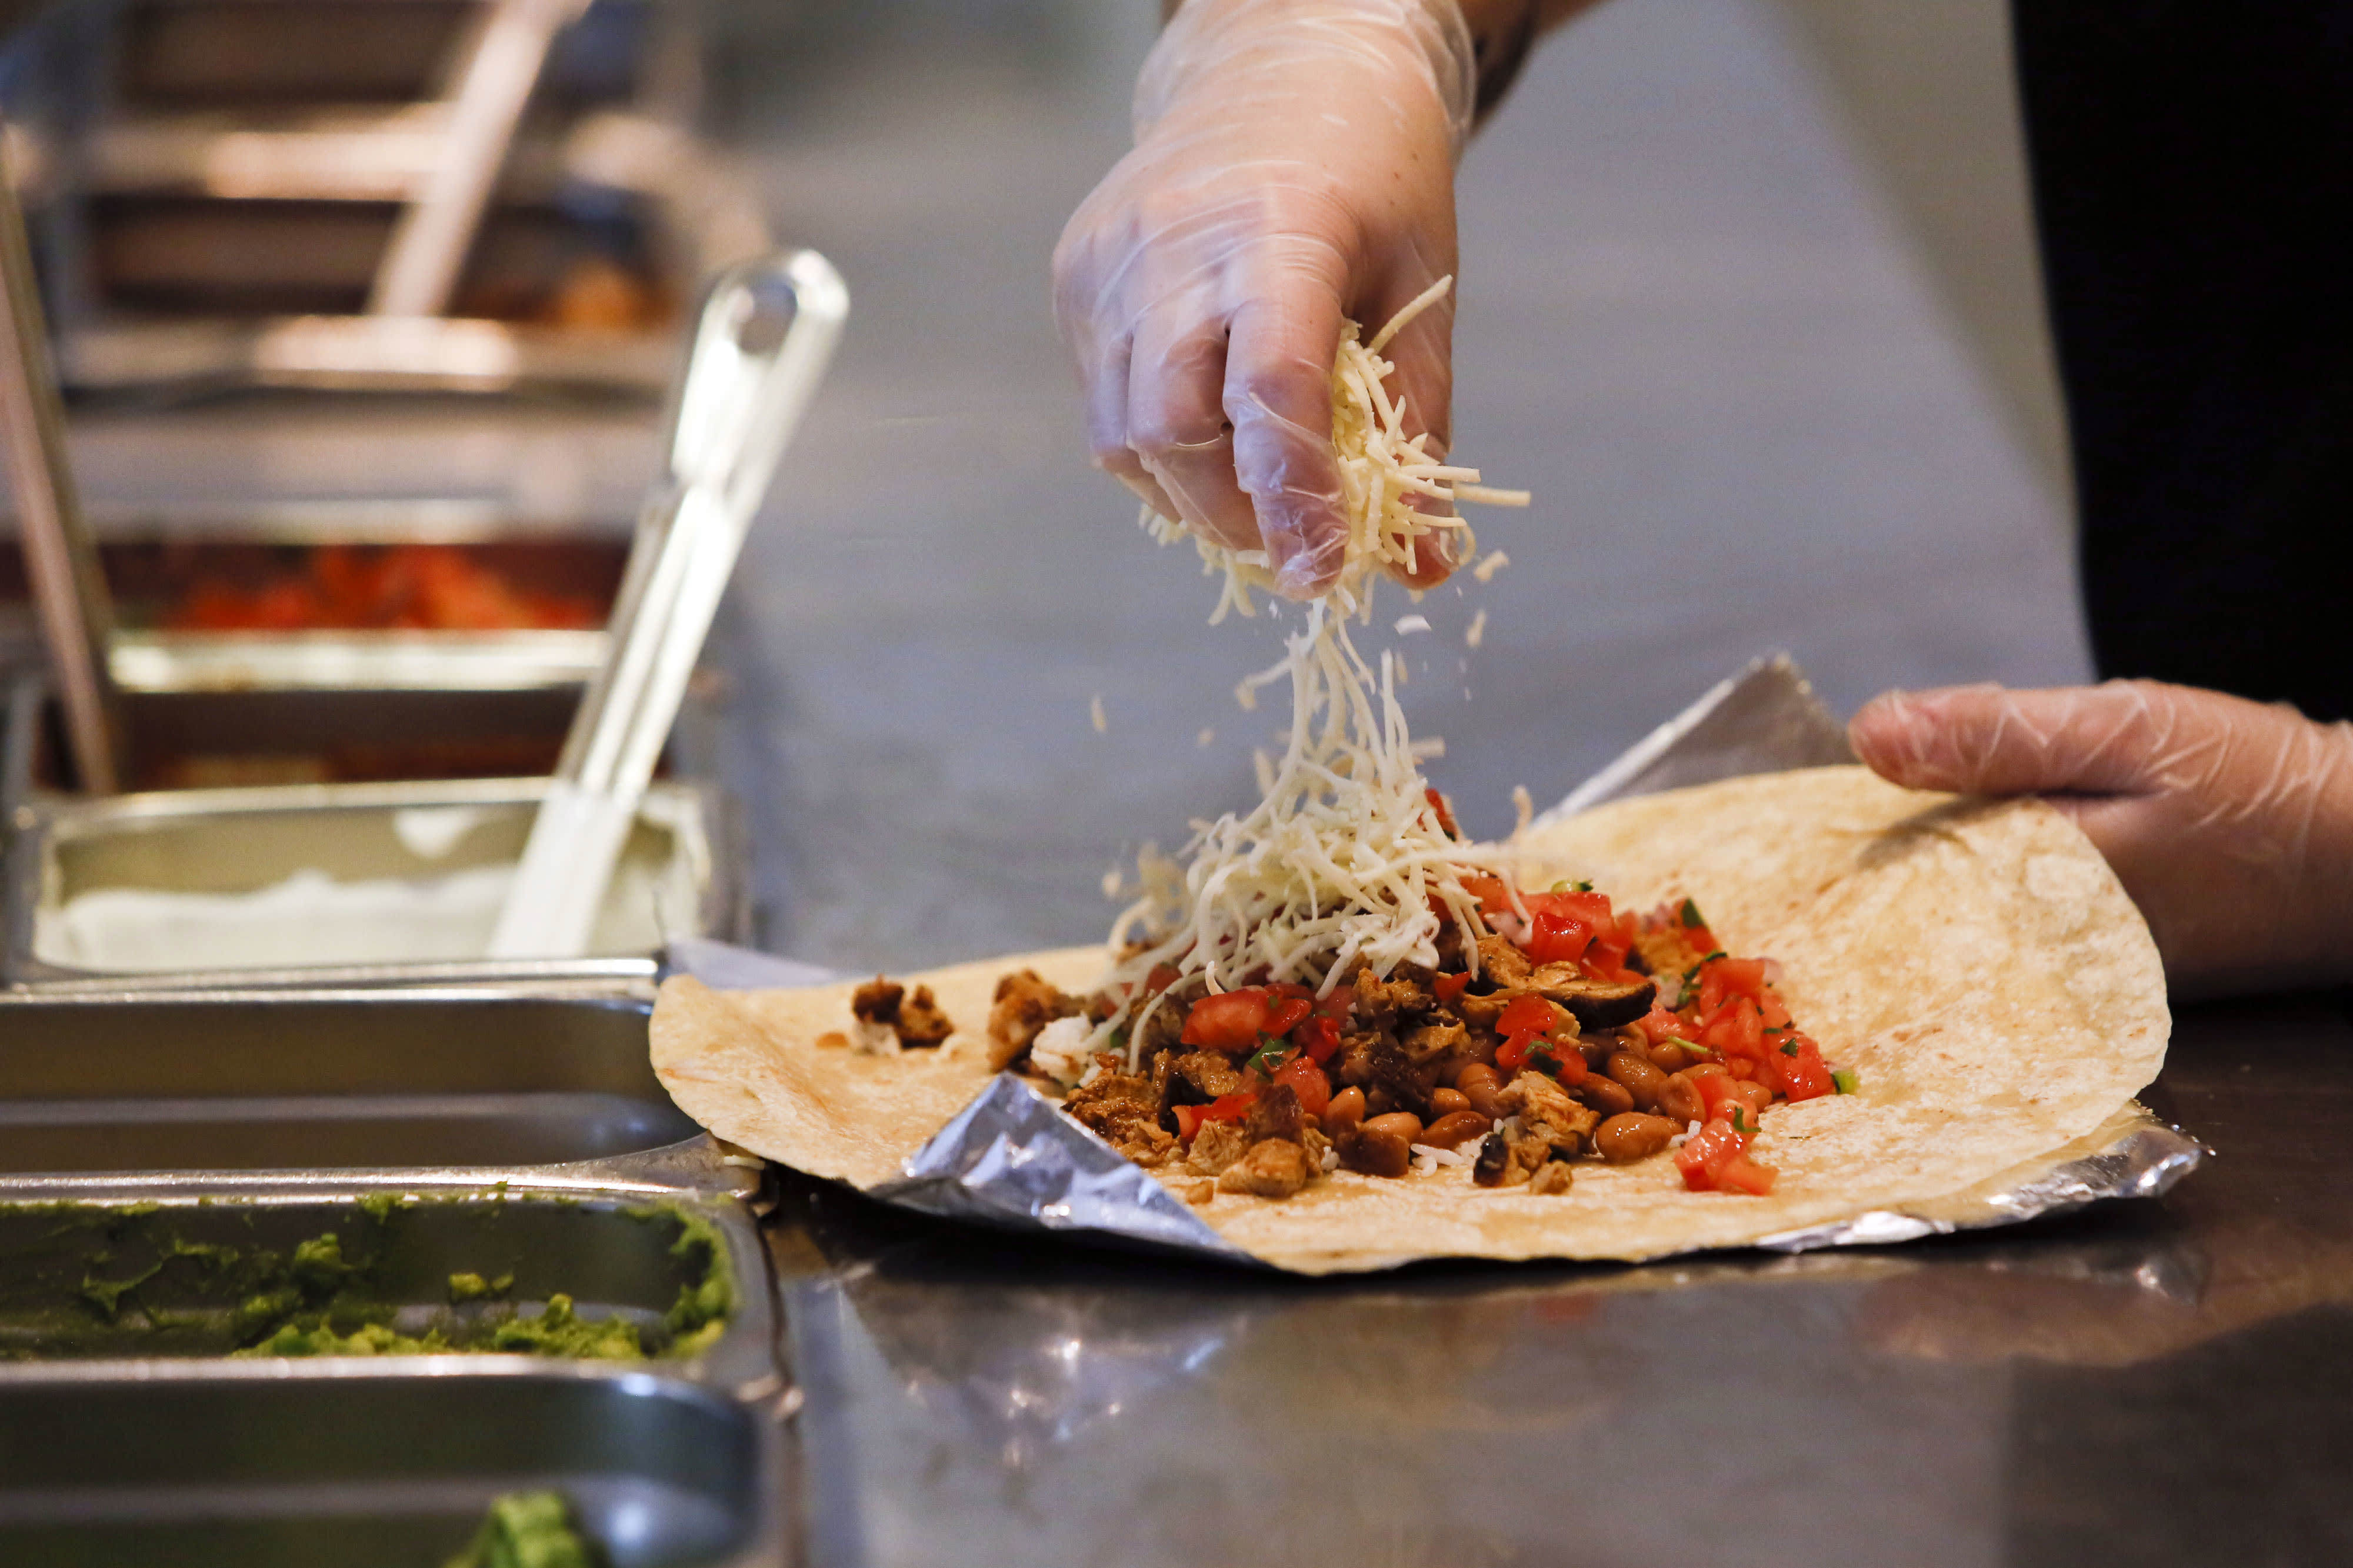 How To Get Free Chipotle On National Burrito Day